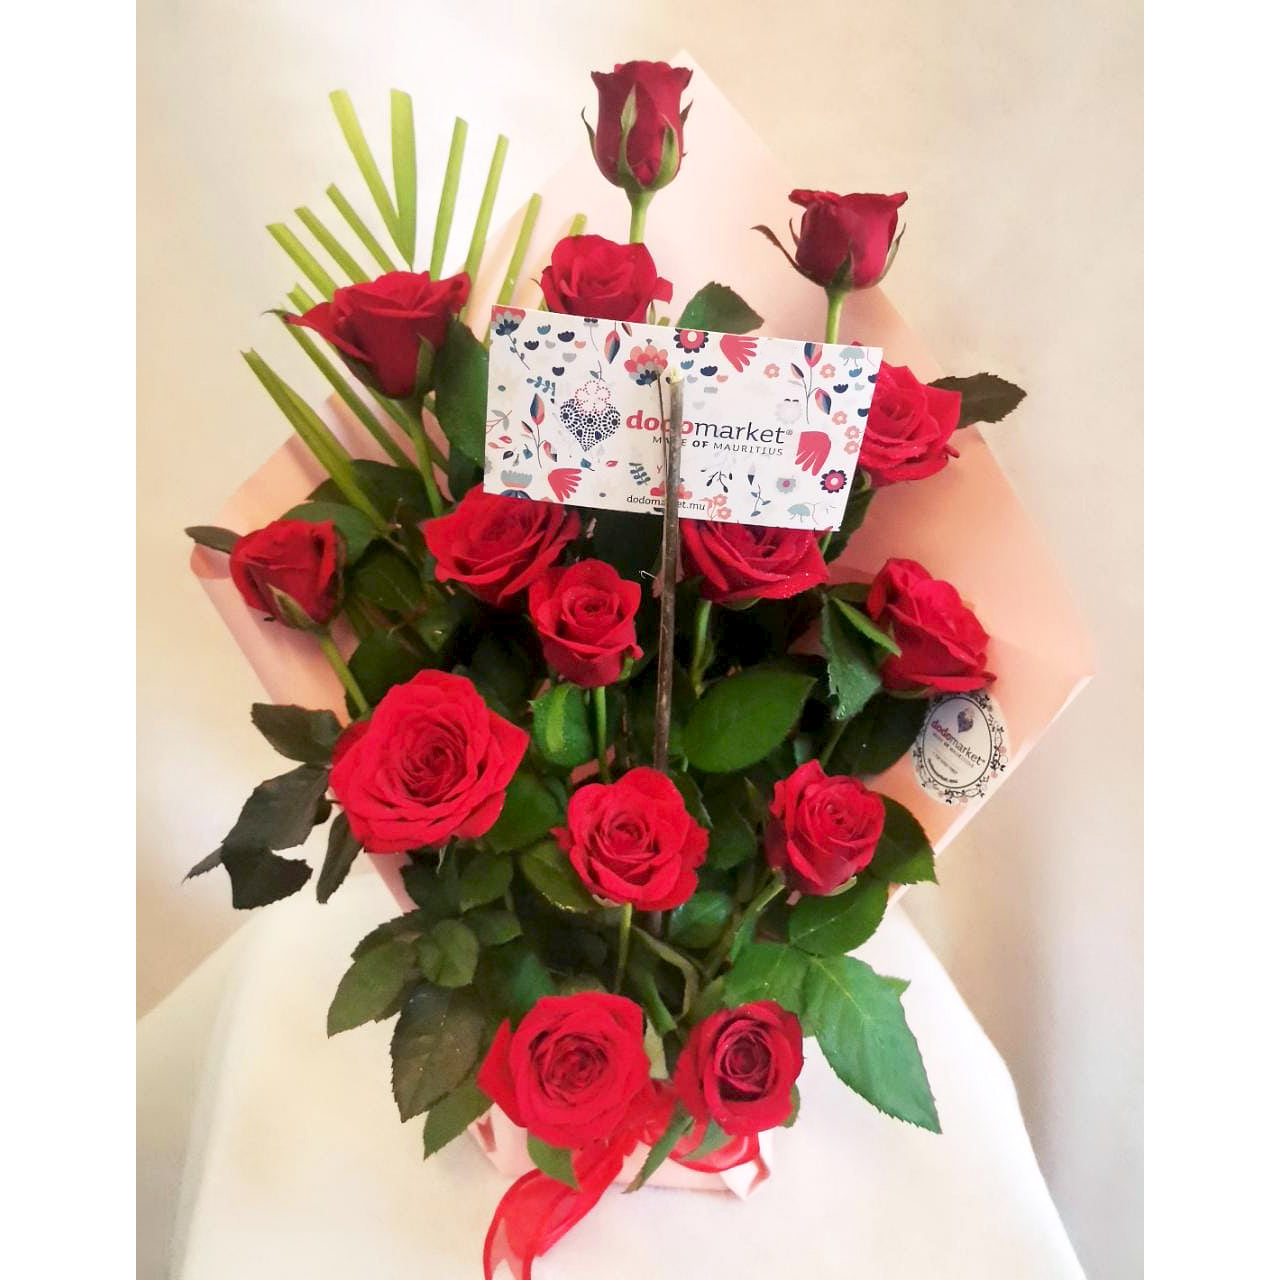 Roses-bouquet-Pure-Passion-15-DodoMarket-delivery-Mauritius